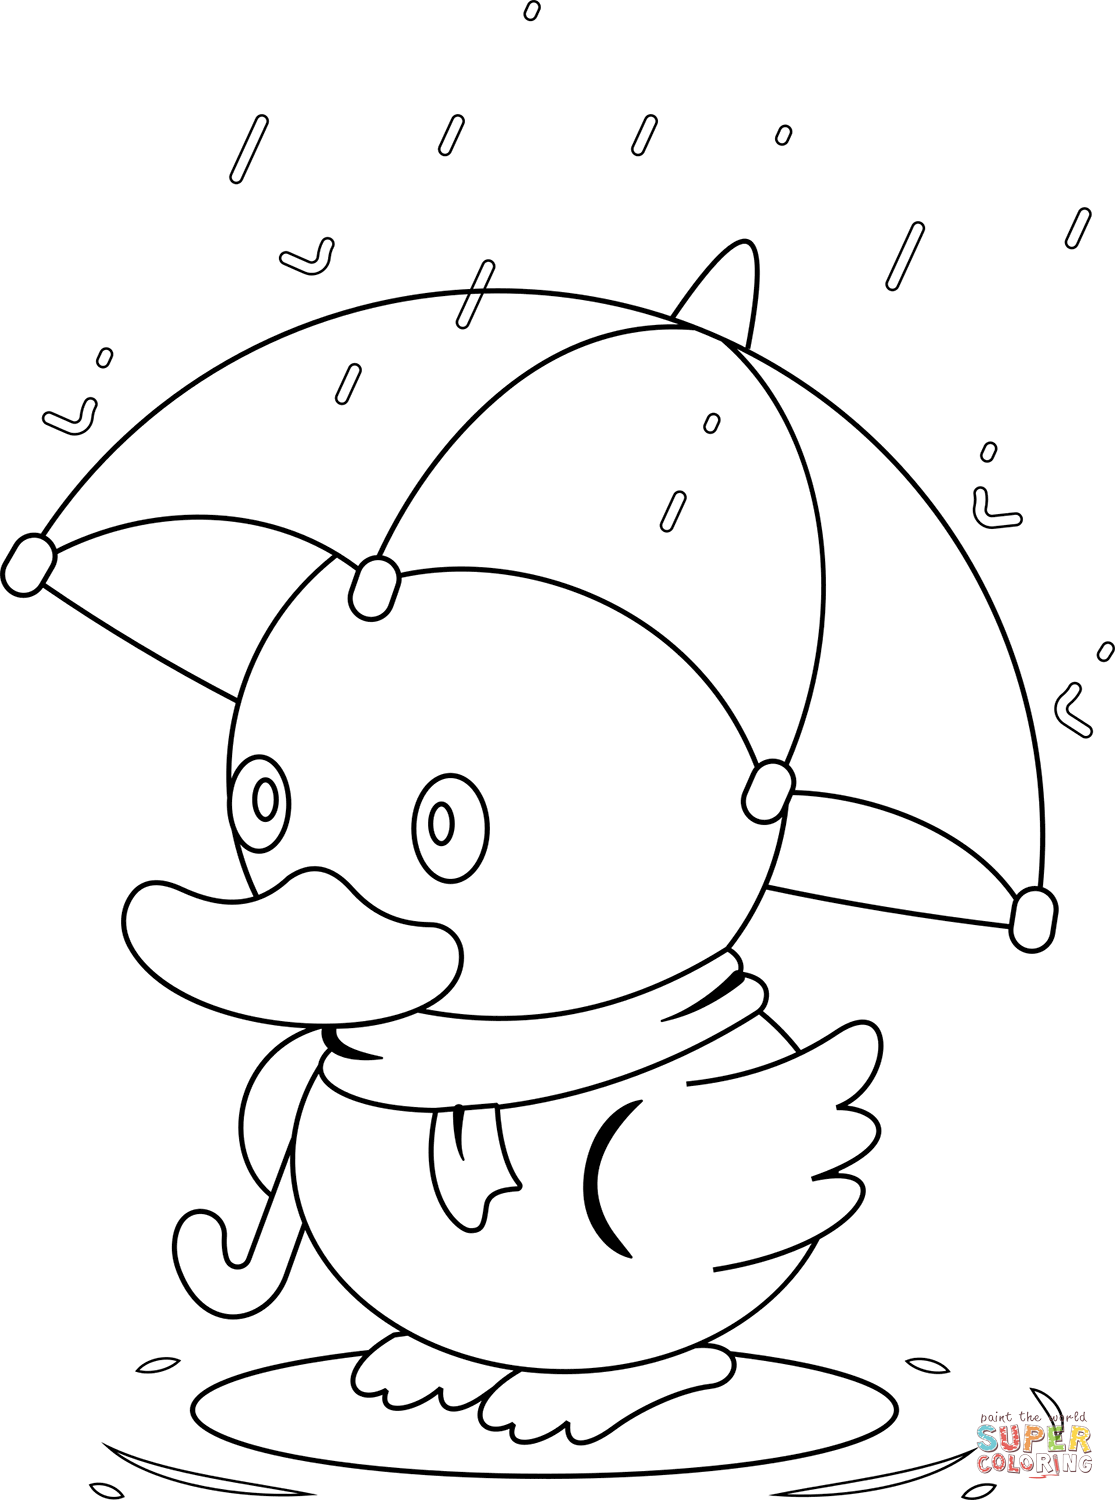 Cute duck with umbrella coloring page free printable coloring pages